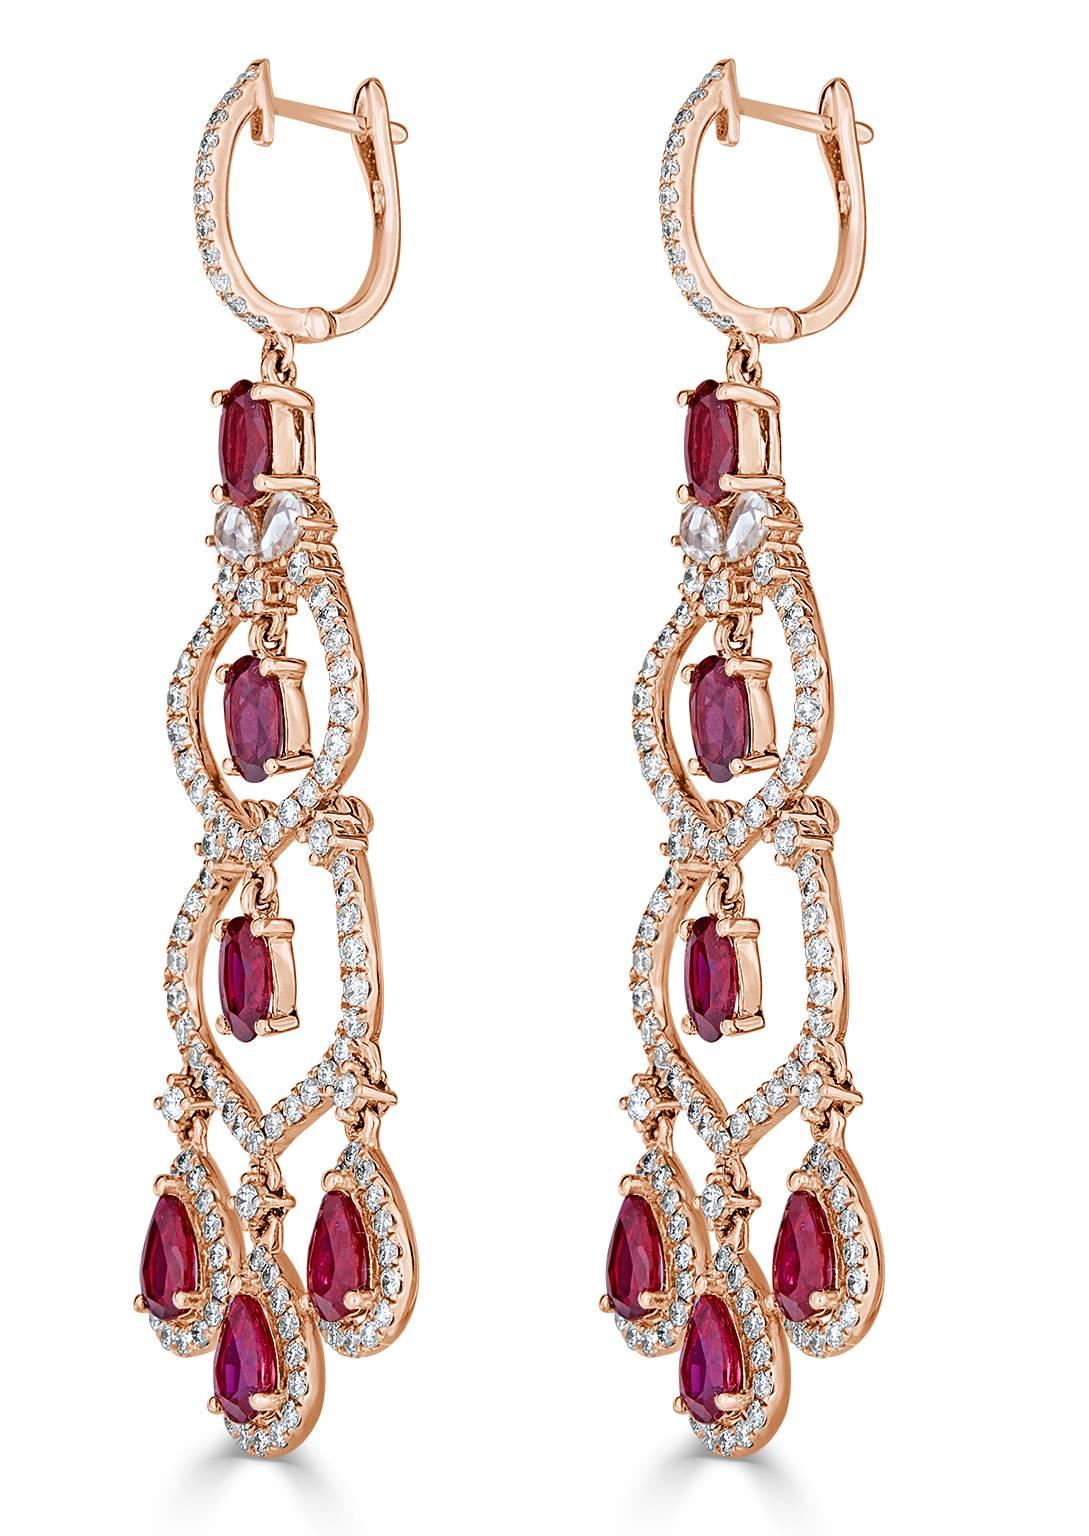 This charming chandelier earring contains 4.90 carats of Rubies.  Diamond pave accents are added throughout the earring for more of a sparkle factor.  If you are looking for a fun and flirty earring for your next cocktail party.  Look no further.